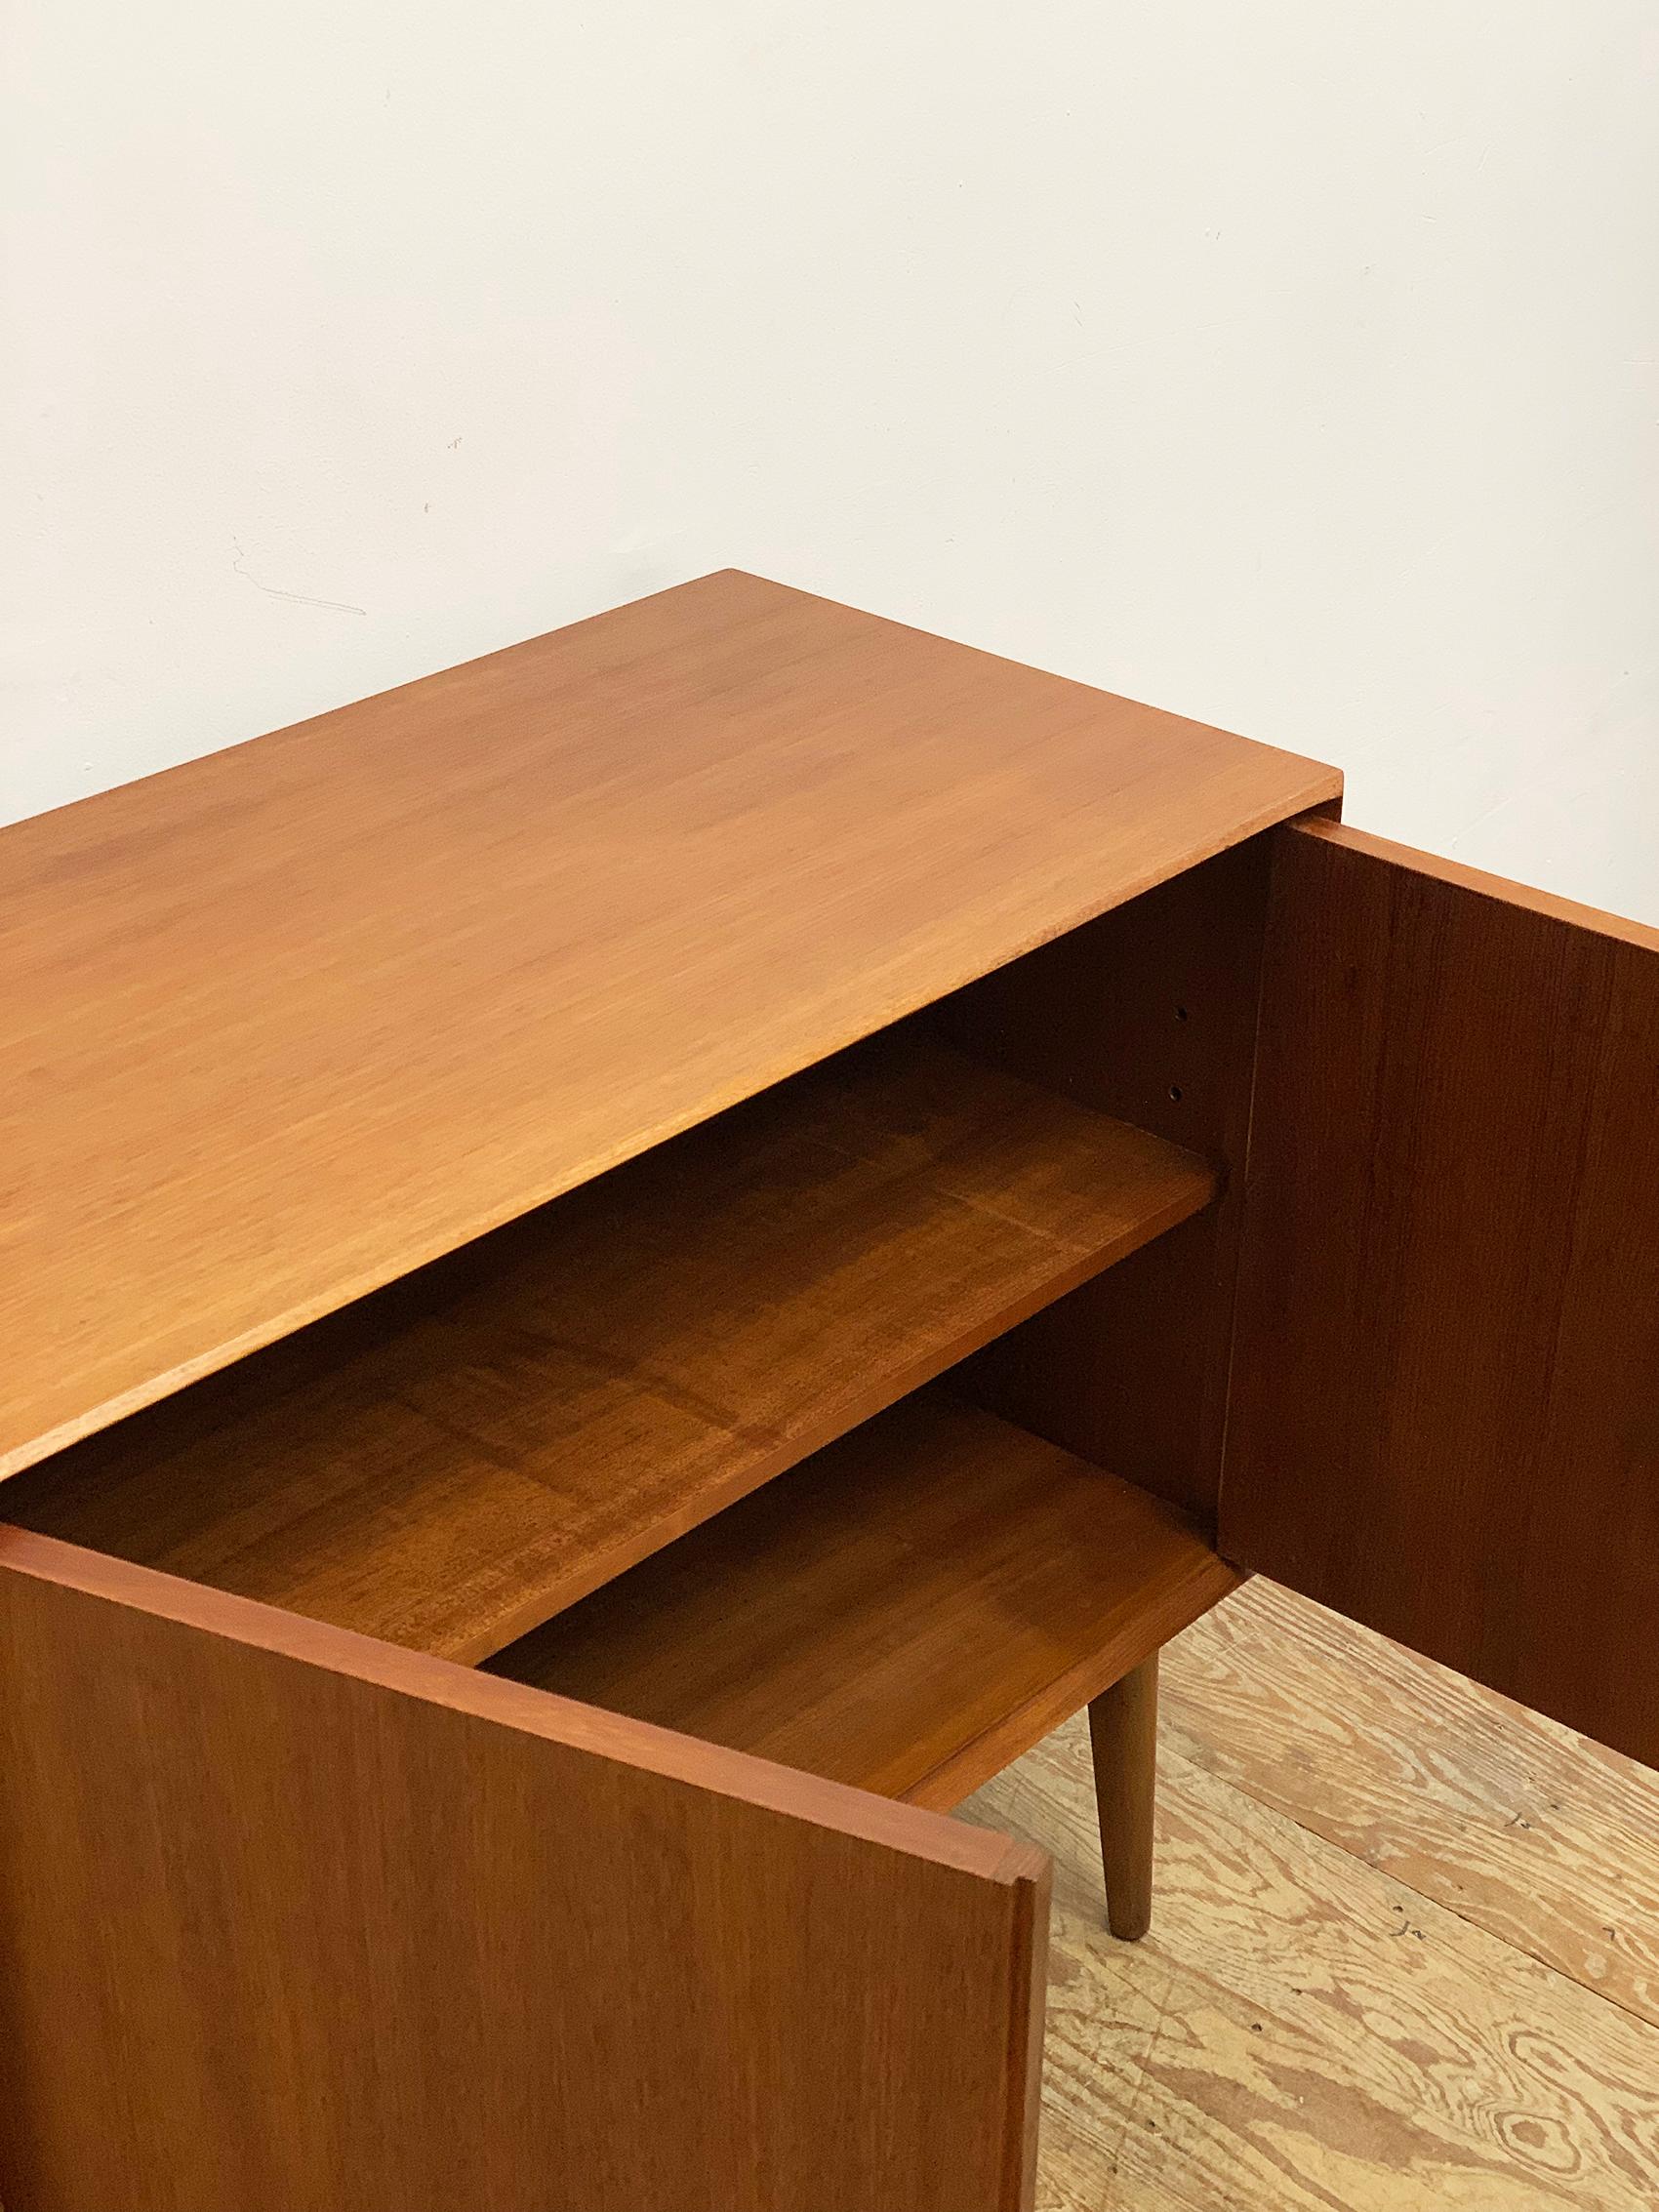 Small Mid-Century Sideboard in Teak by Rex Raab for Wilhelm Renz, Germany, 1960s For Sale 7